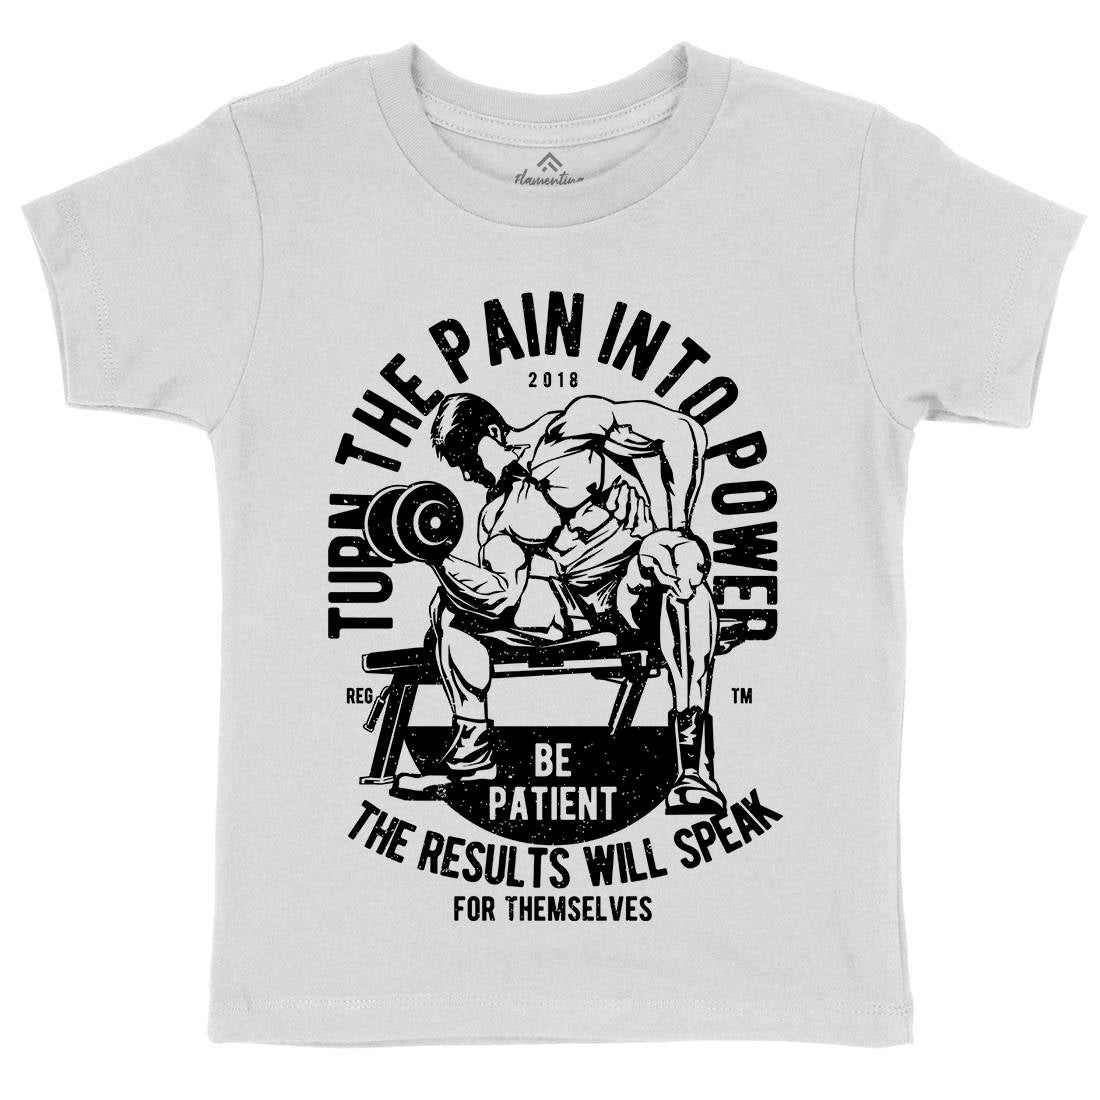 Turn The Pain Into Power Kids Crew Neck T-Shirt Gym A780